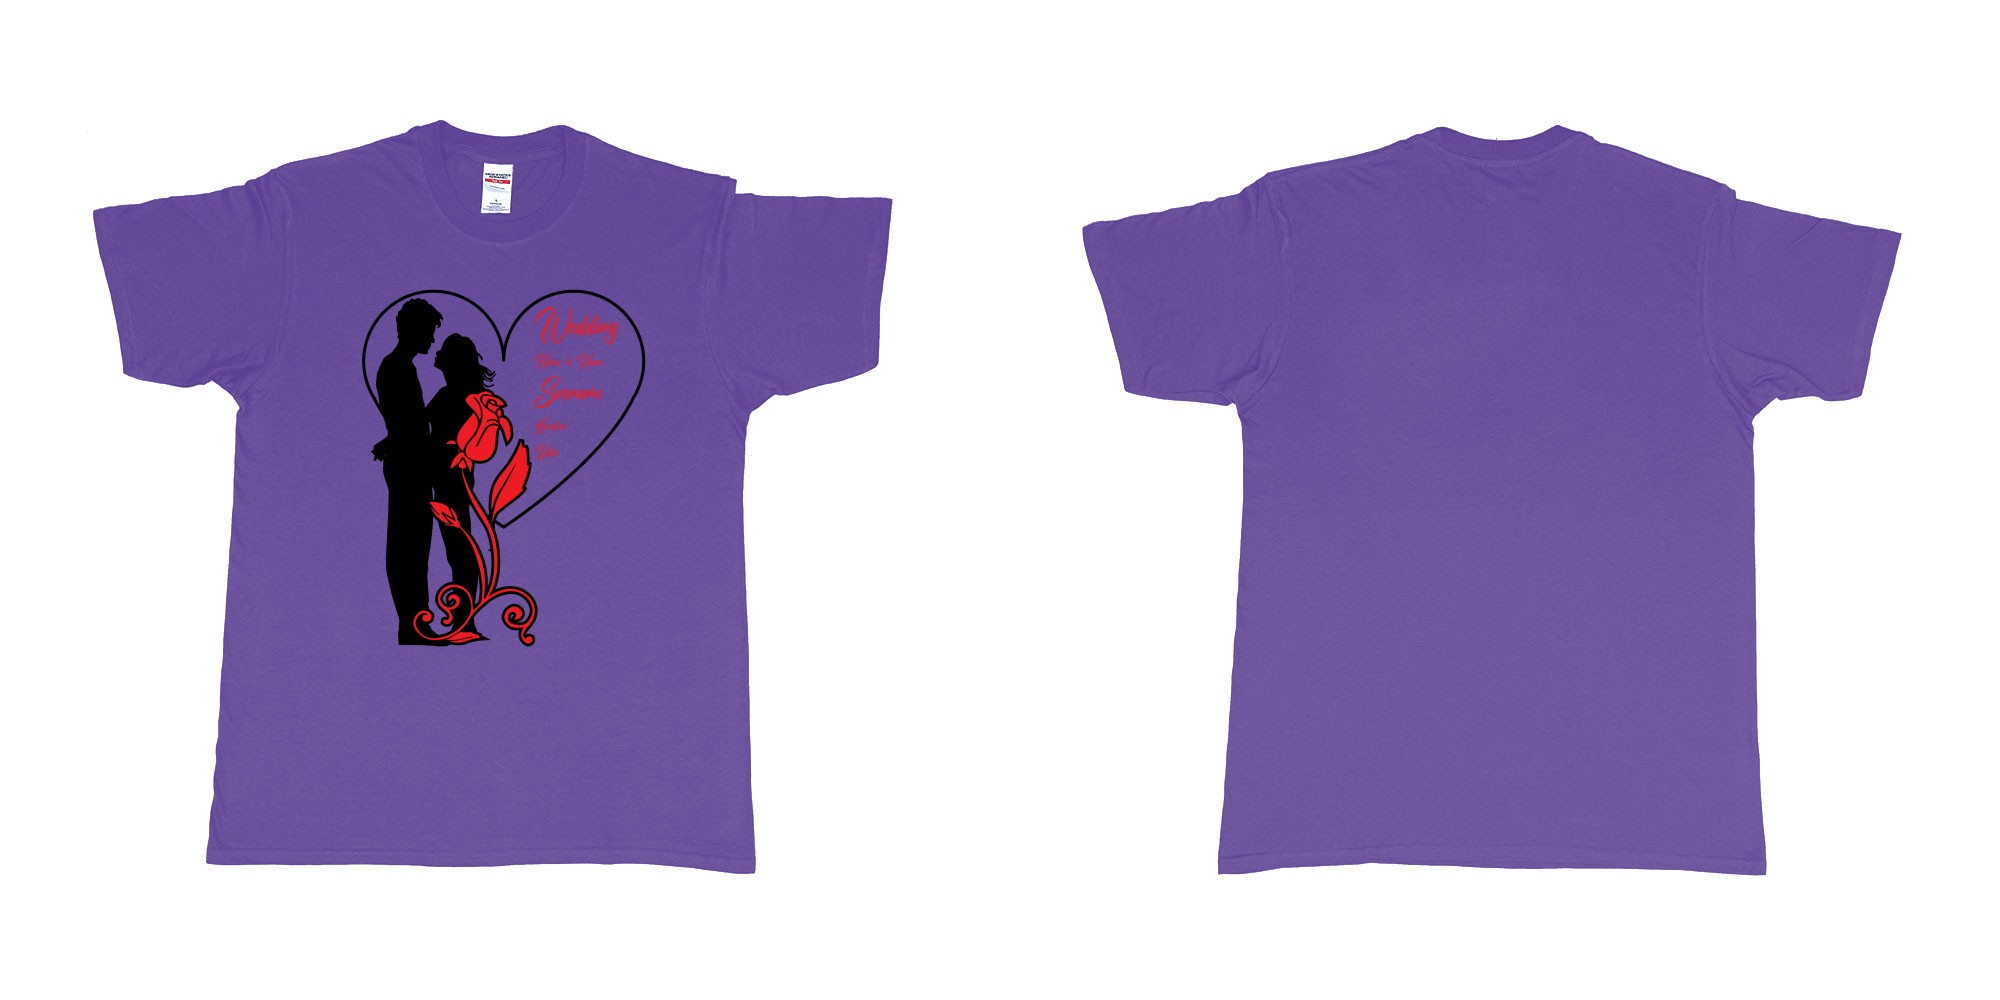 Custom tshirt design wedding couple rose heart in fabric color purple choice your own text made in Bali by The Pirate Way